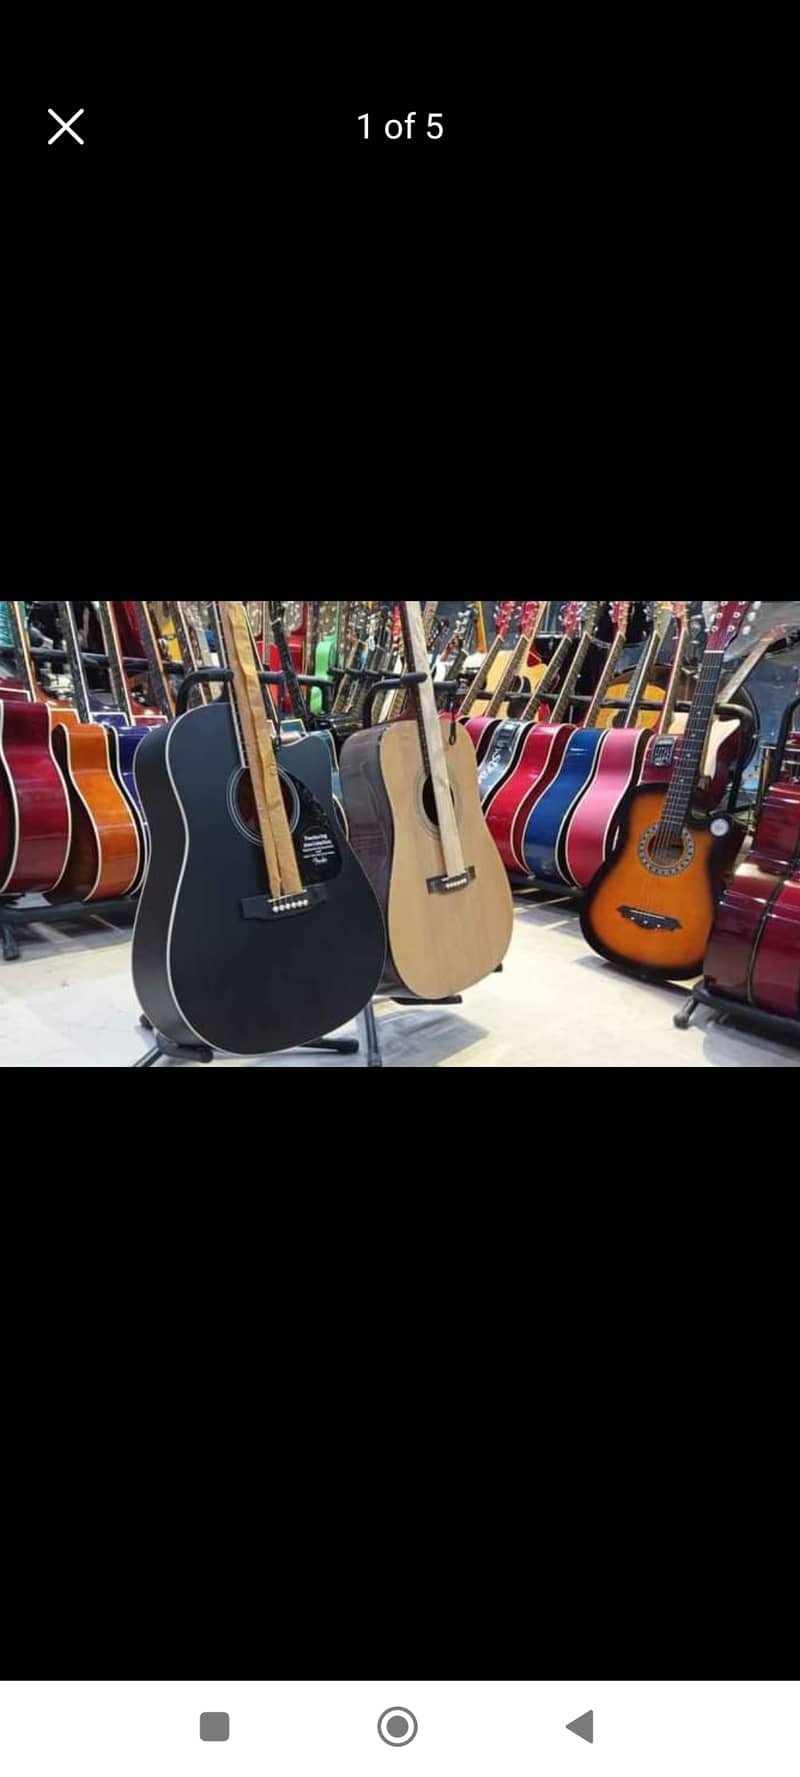 Quality jambo guitar collection at Acoustica guitar shop 1